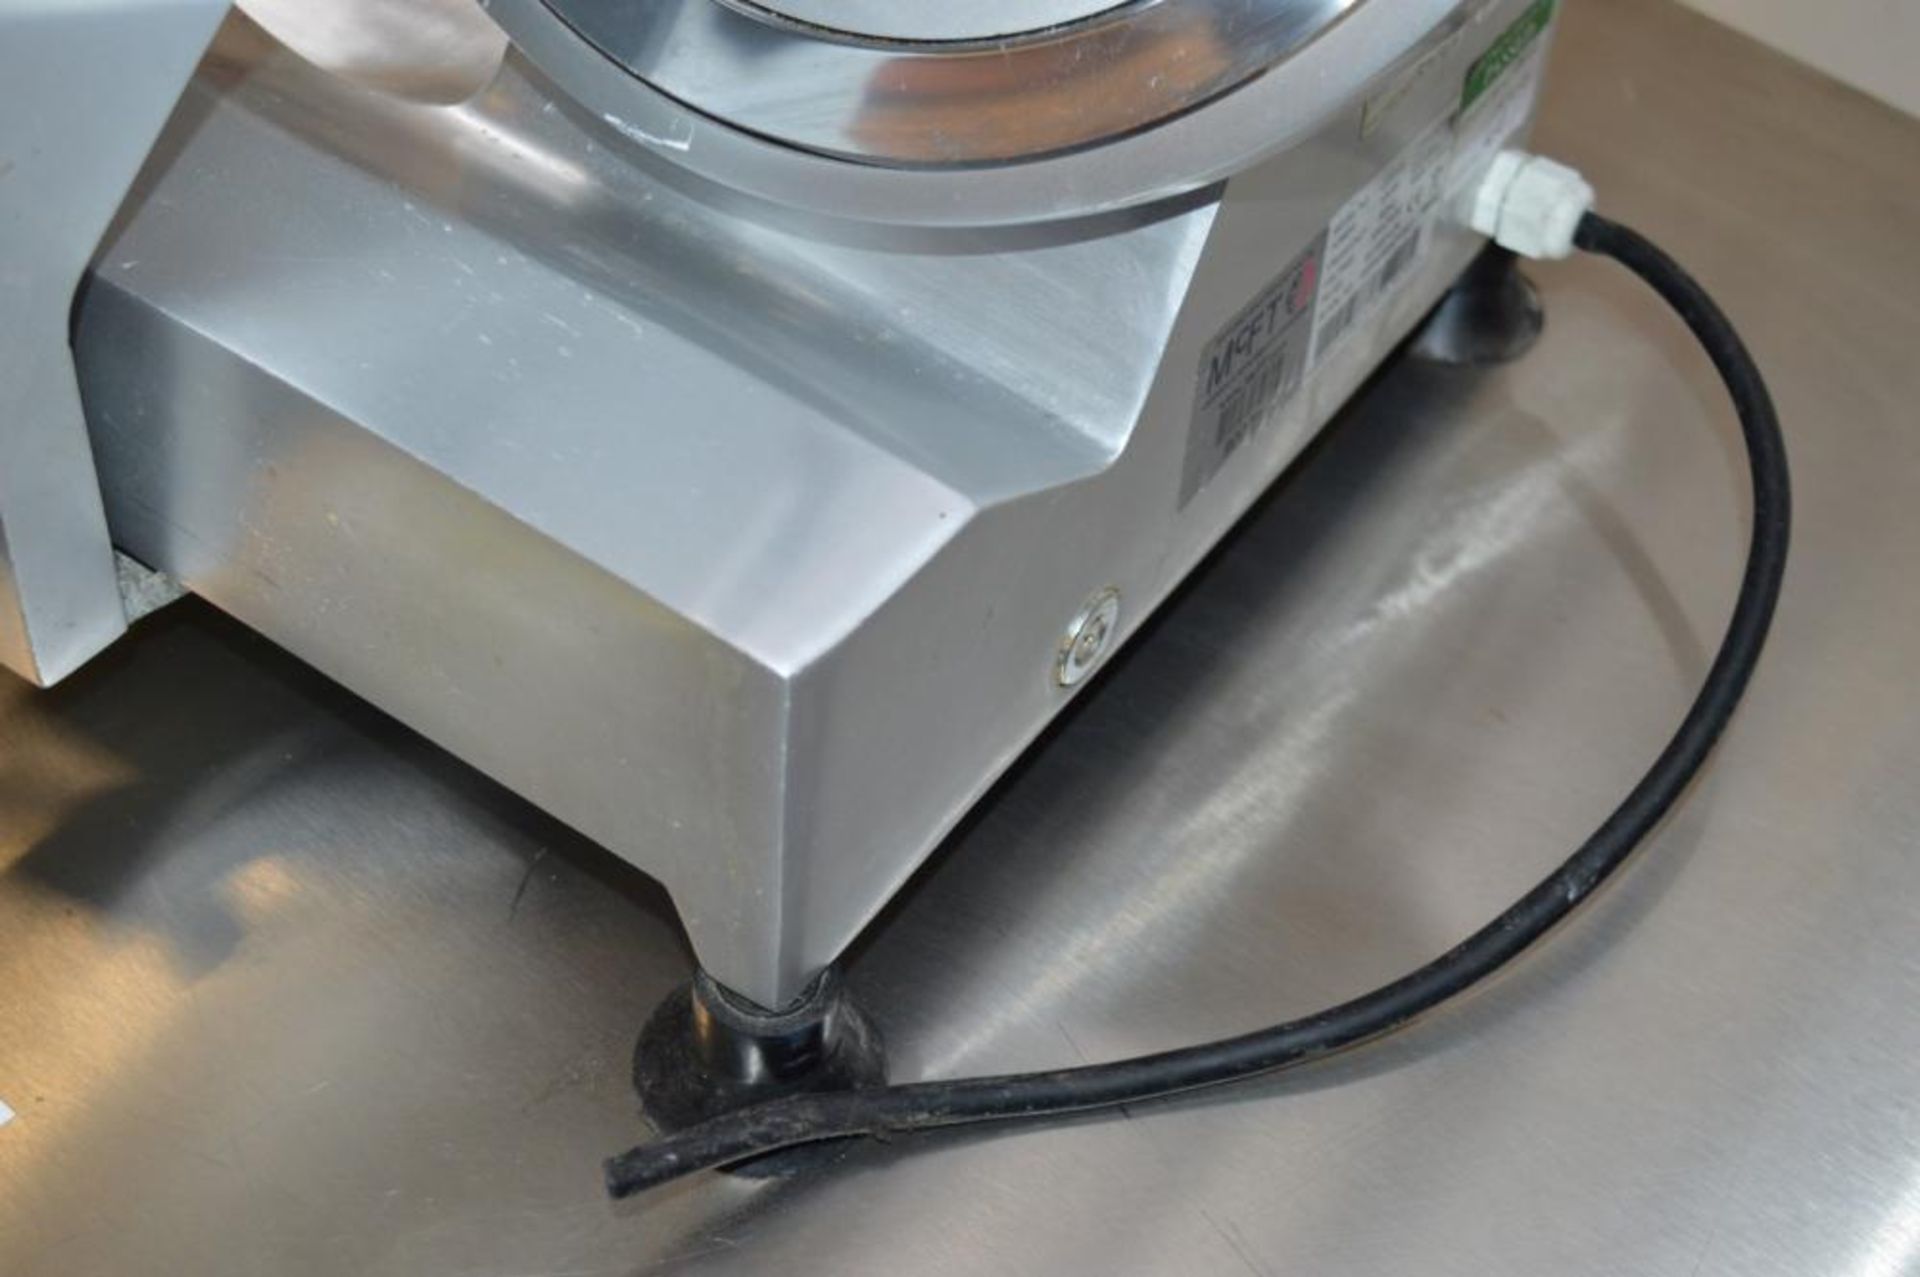 1 x Buffalo CD278 Stainless Steel Commercial 10 Inch Meat Slicer - 240V 120W - H40 x W47 x D40 cms - - Image 3 of 10